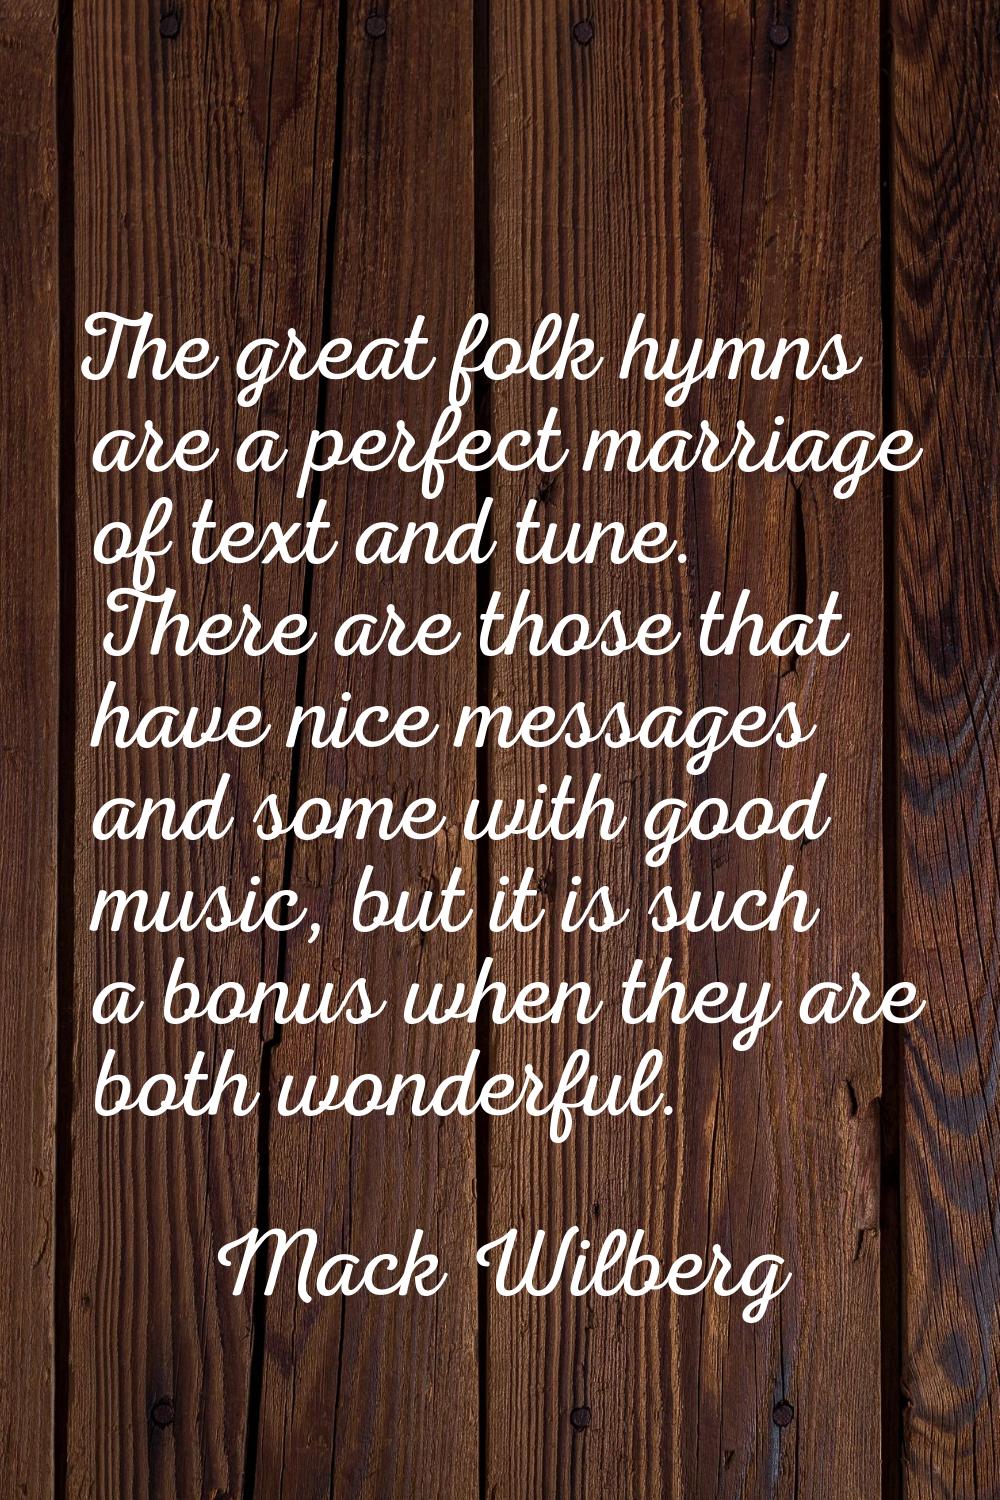 The great folk hymns are a perfect marriage of text and tune. There are those that have nice messag